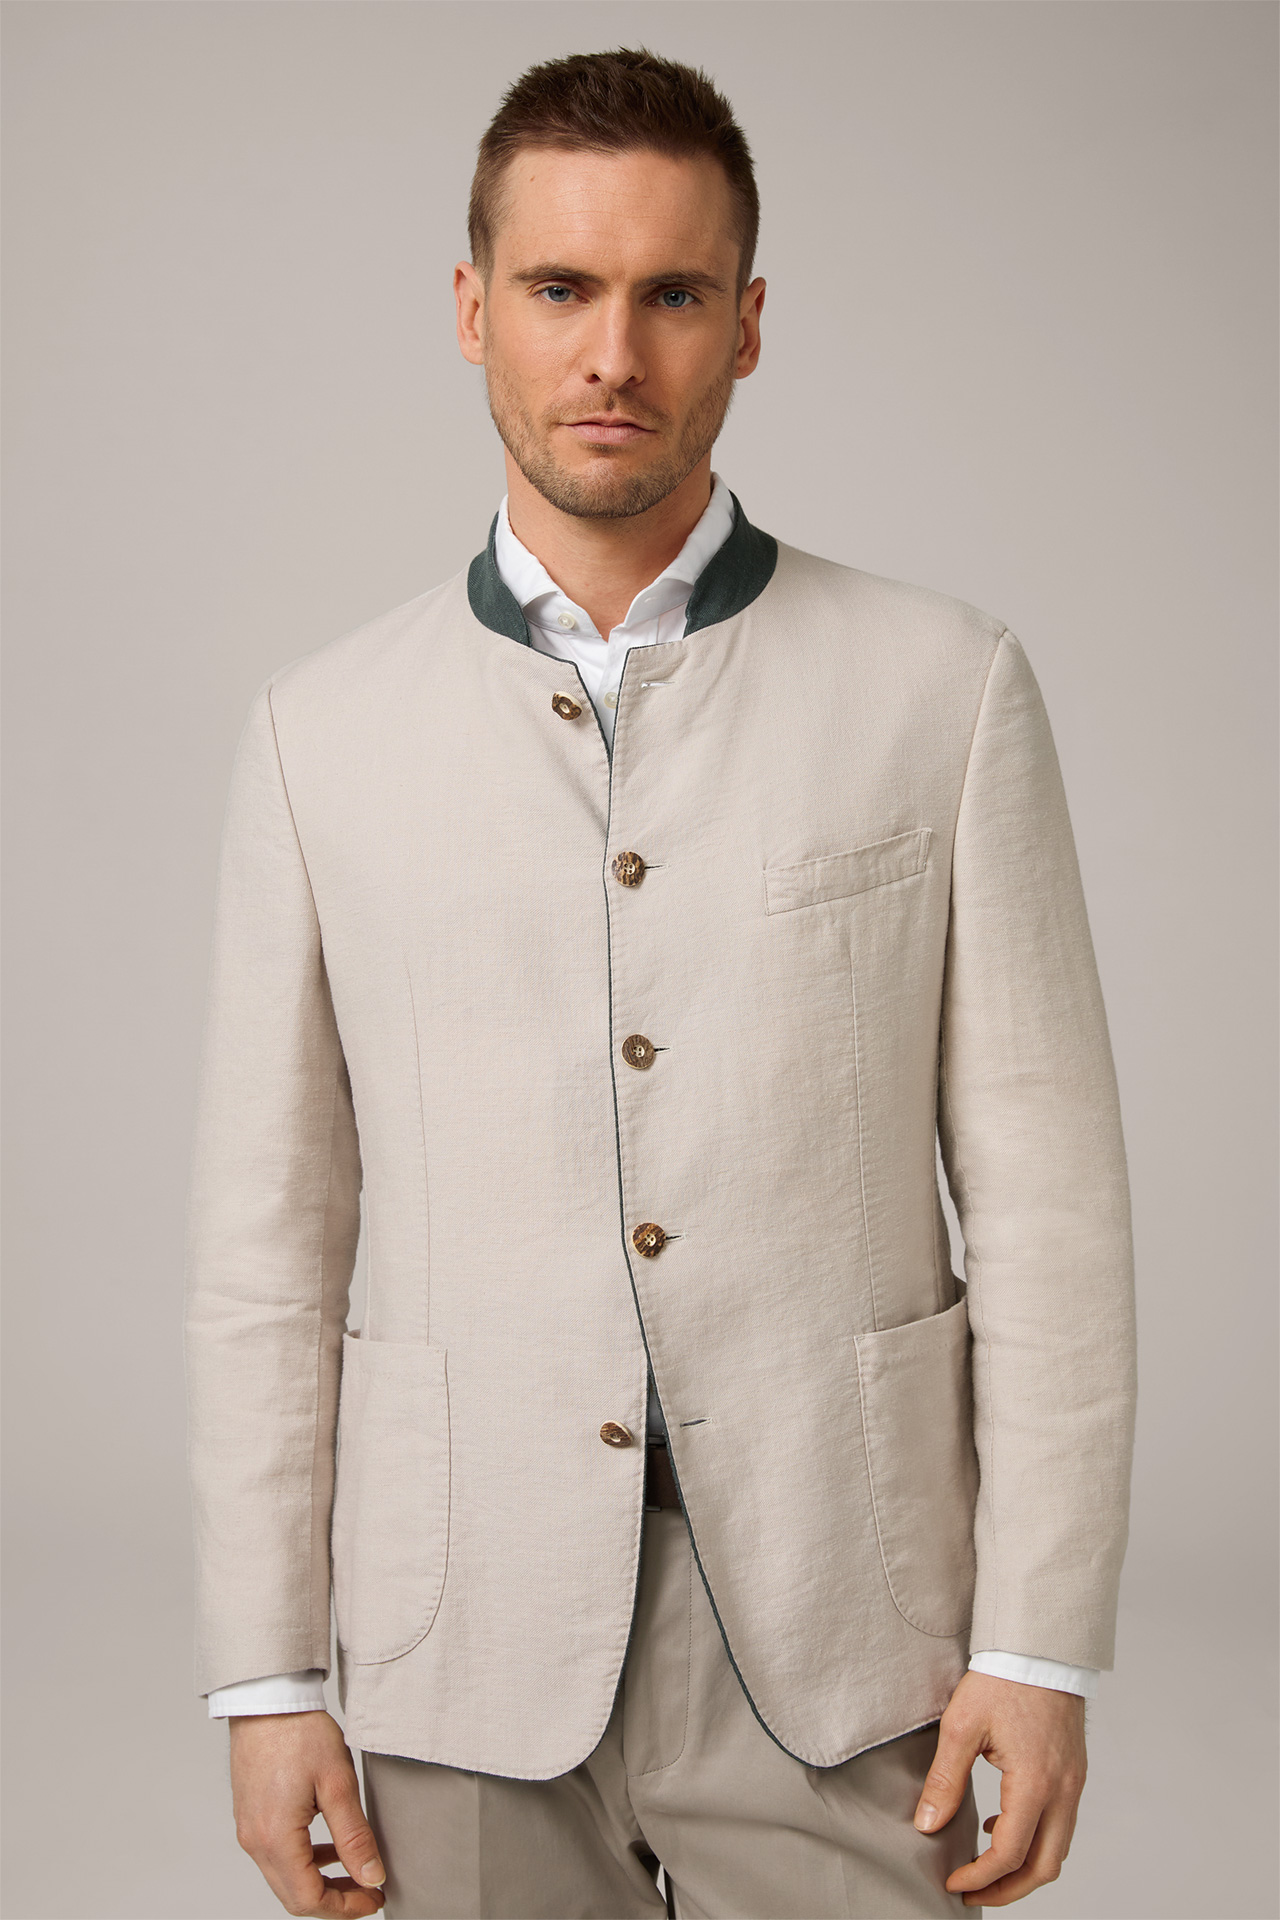 Giesing Traditional Jacket in Light Beige